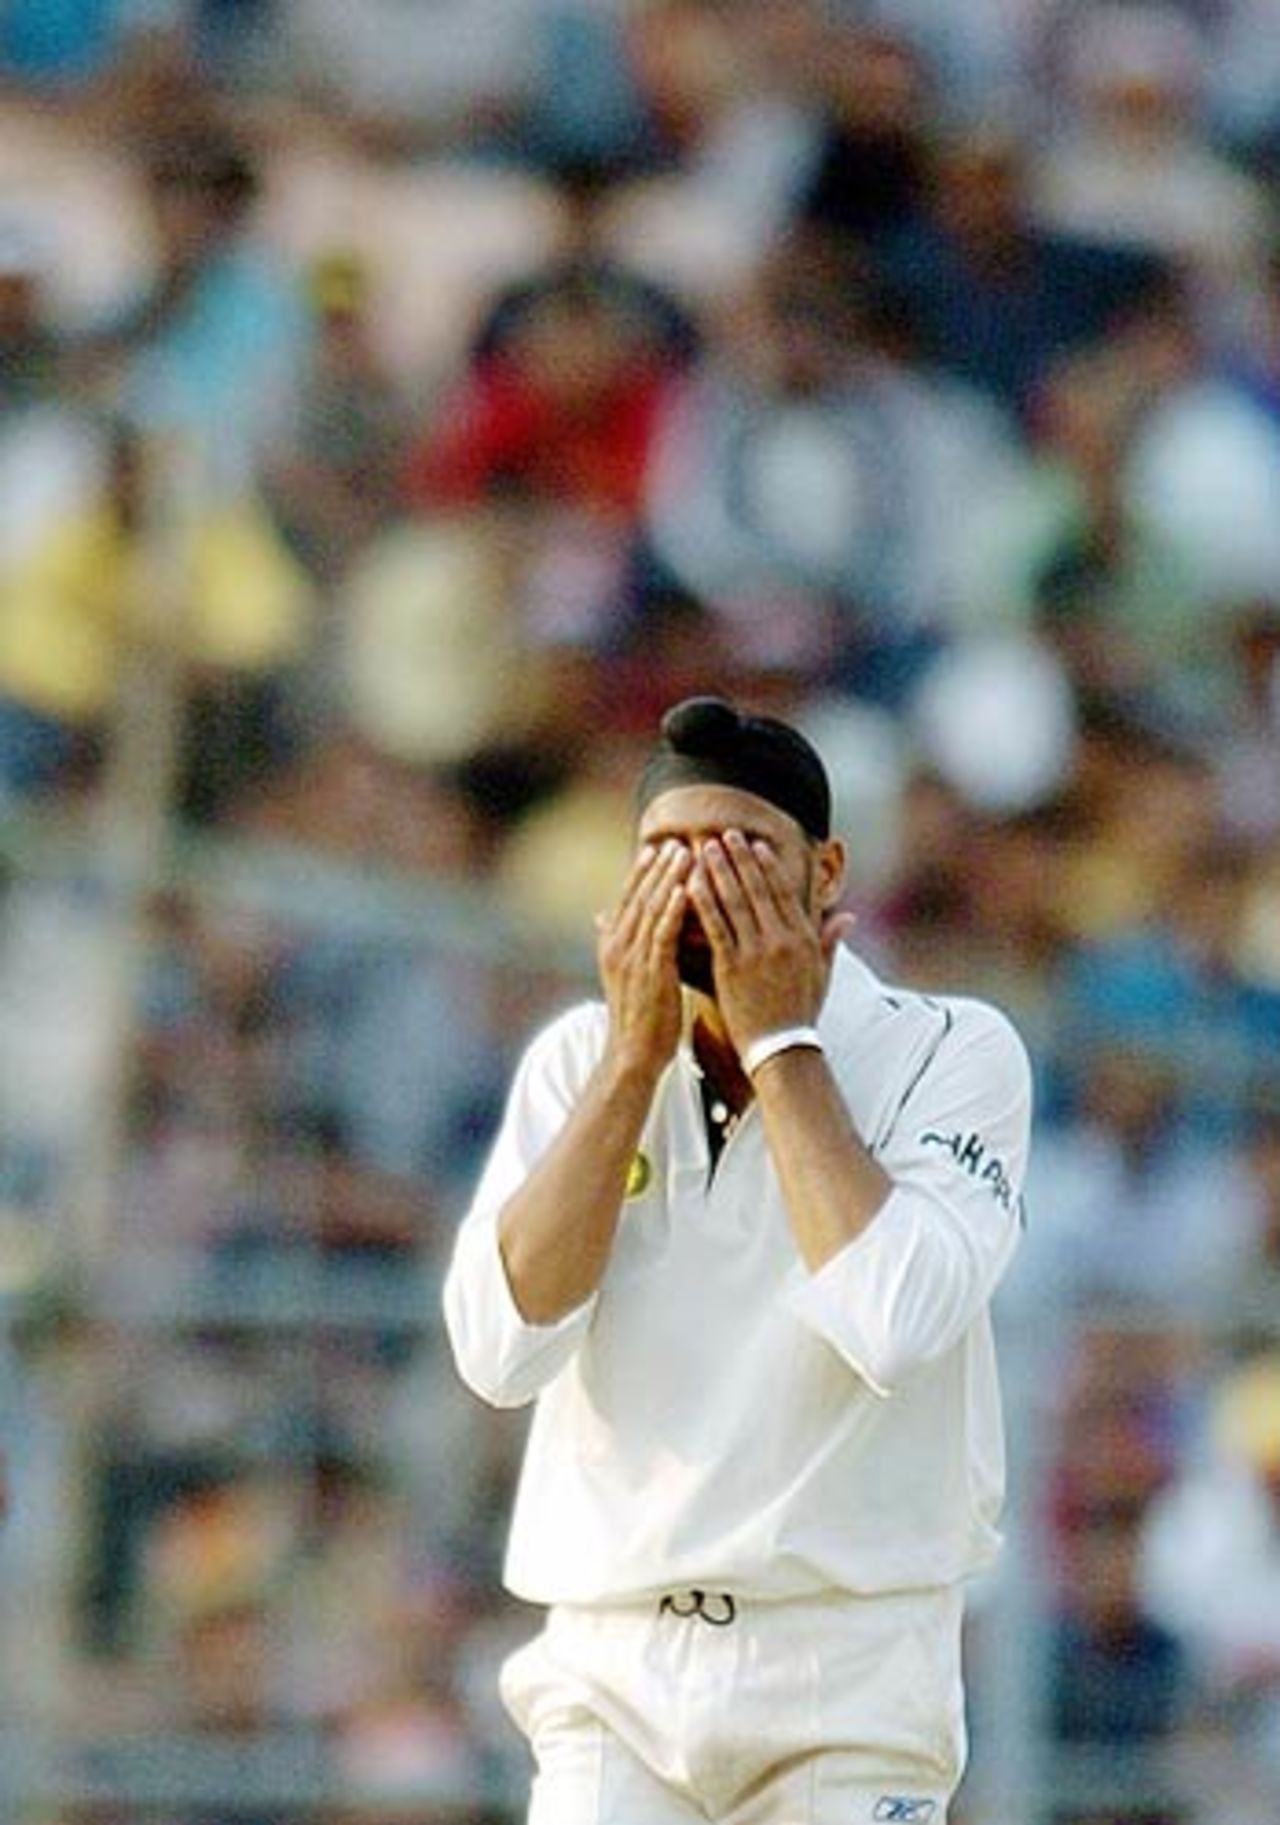 Harbhajan Singh, who has been the most successful bowler at Eden Gardens, didn't quite enjoy the same luck today, India v Pakistan, 2nd Test, Kolkata, March 17, 2005